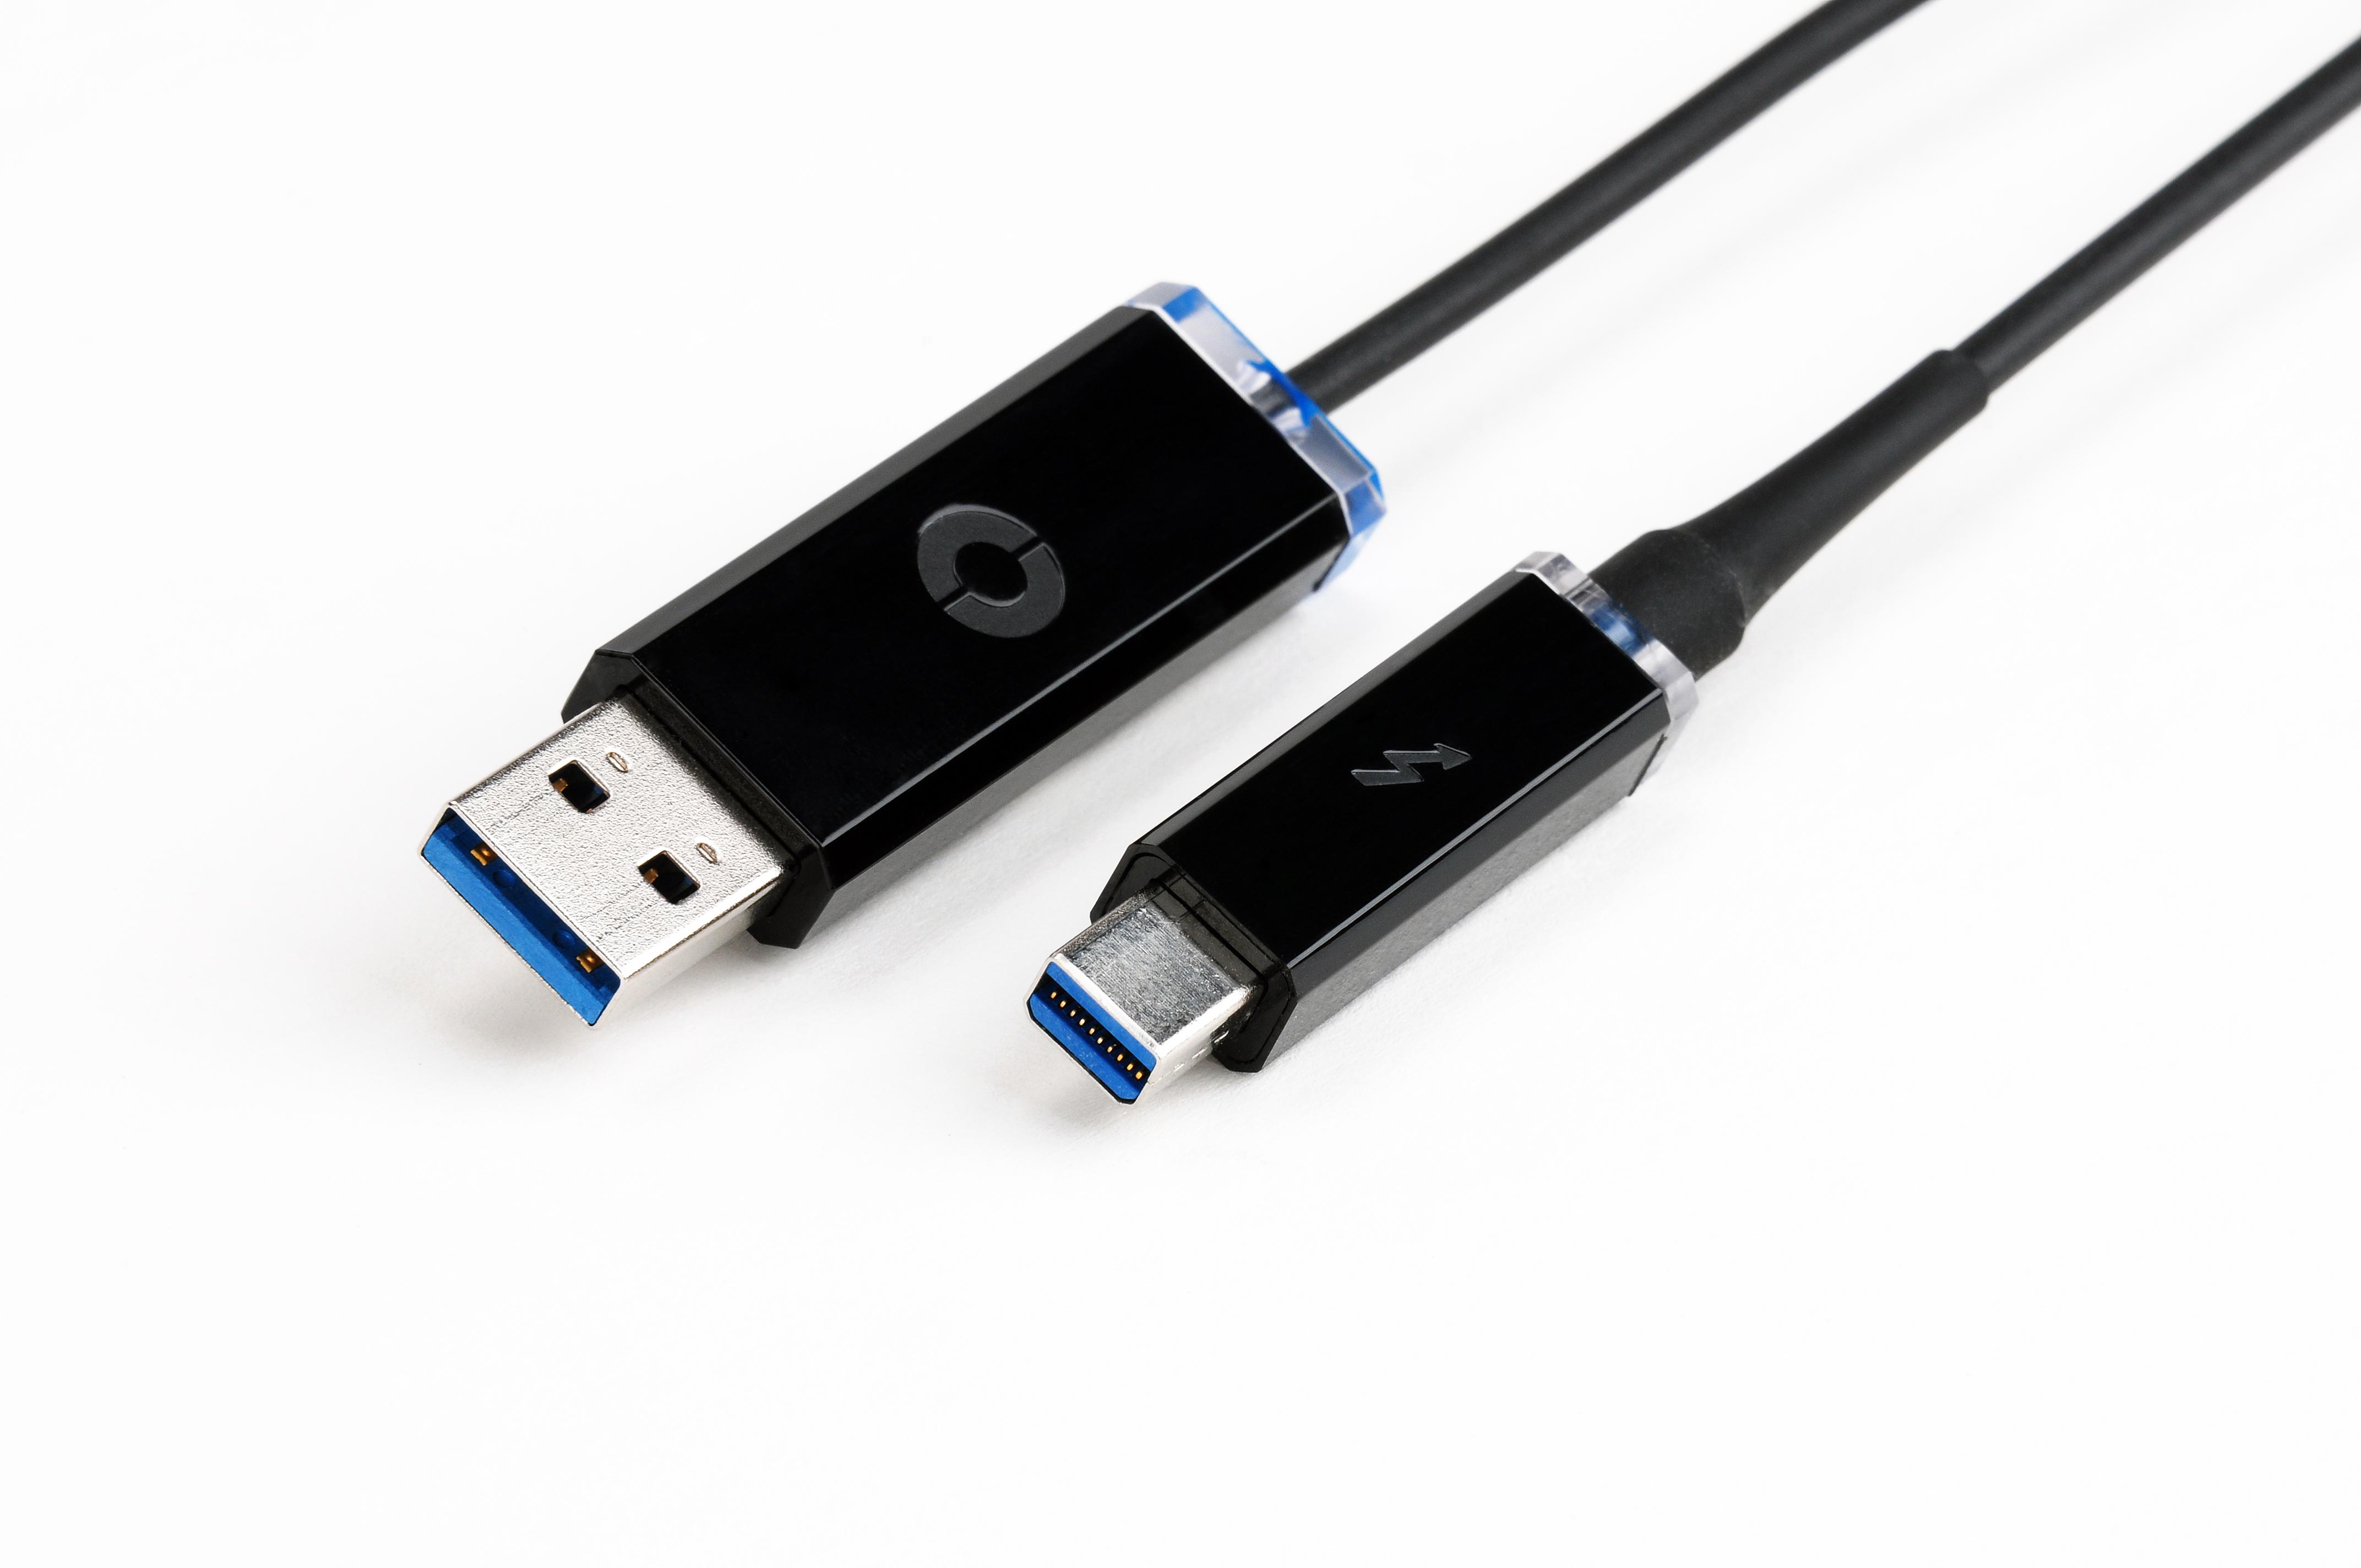 Corning Introduce Optical Cables for Today's Data-Rich Consumer Electronic Applications